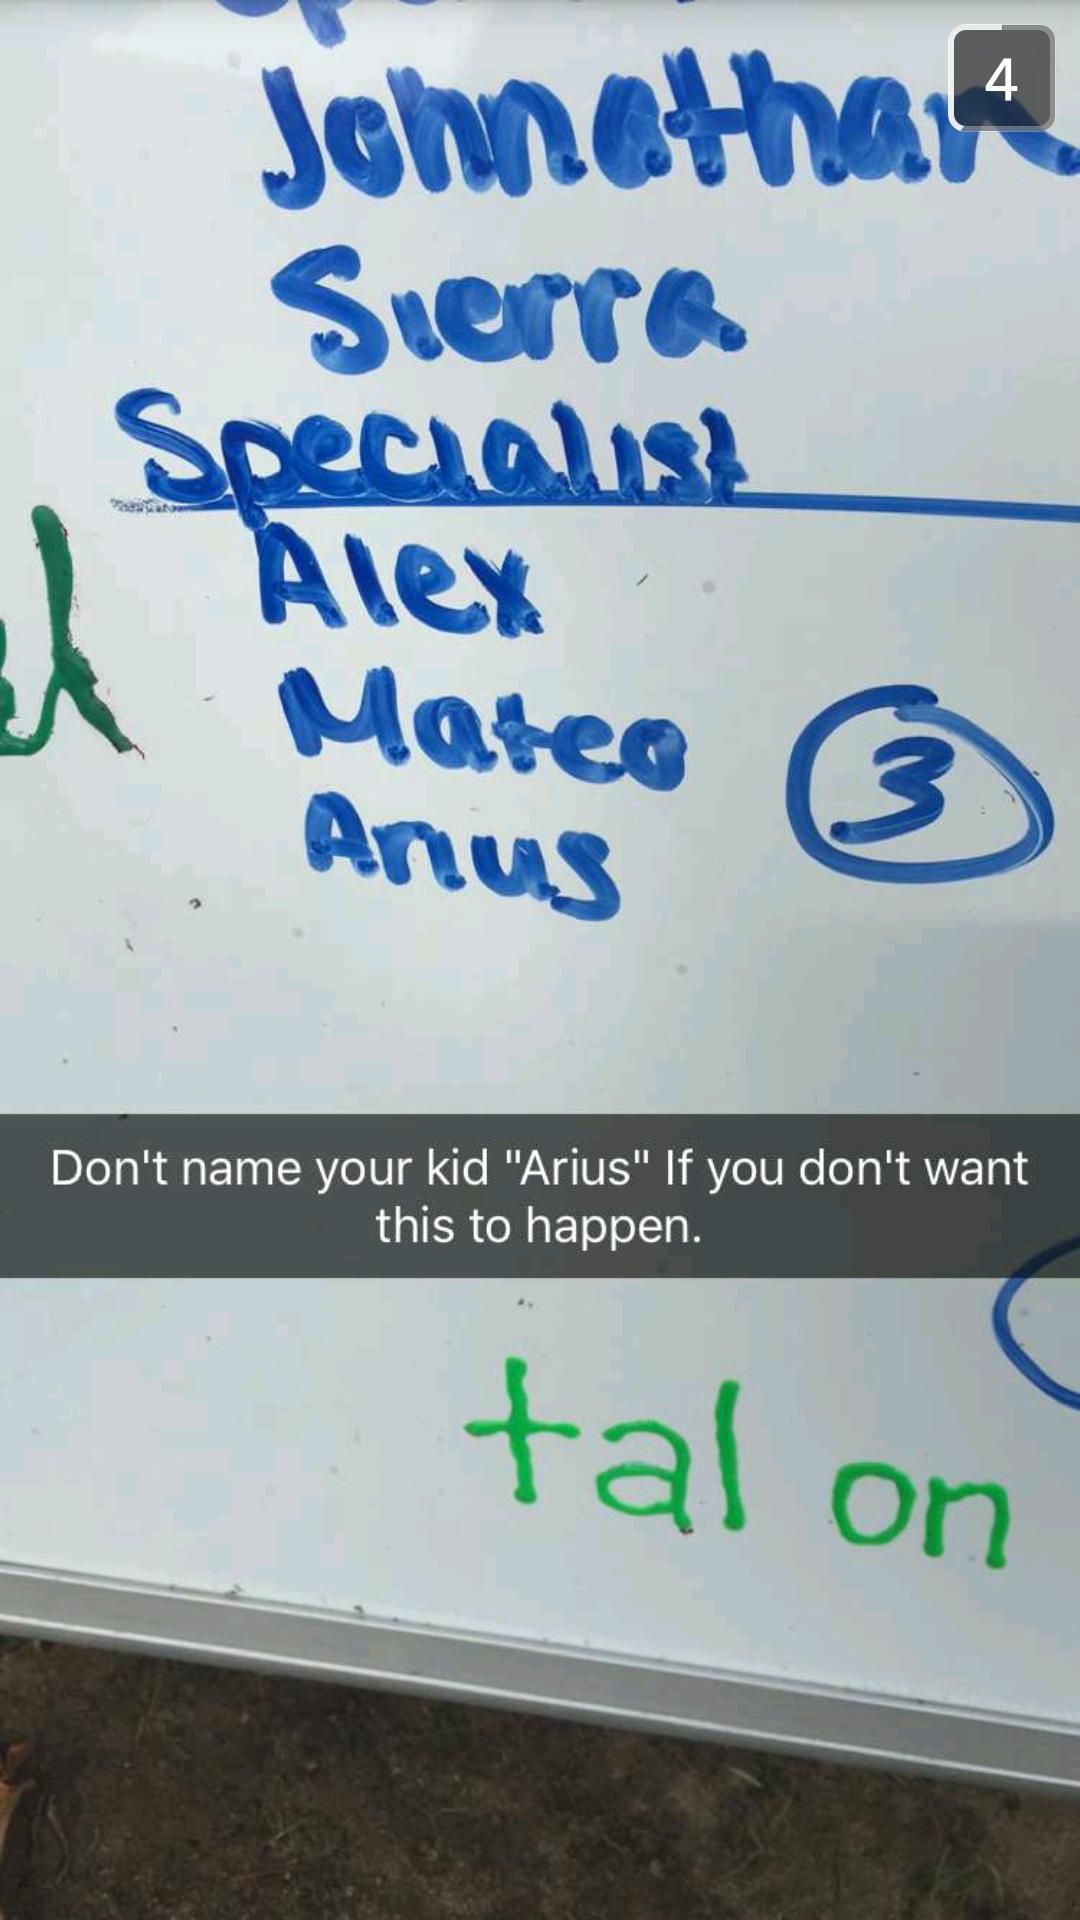 Just a tip for parents considering original names for their kids...